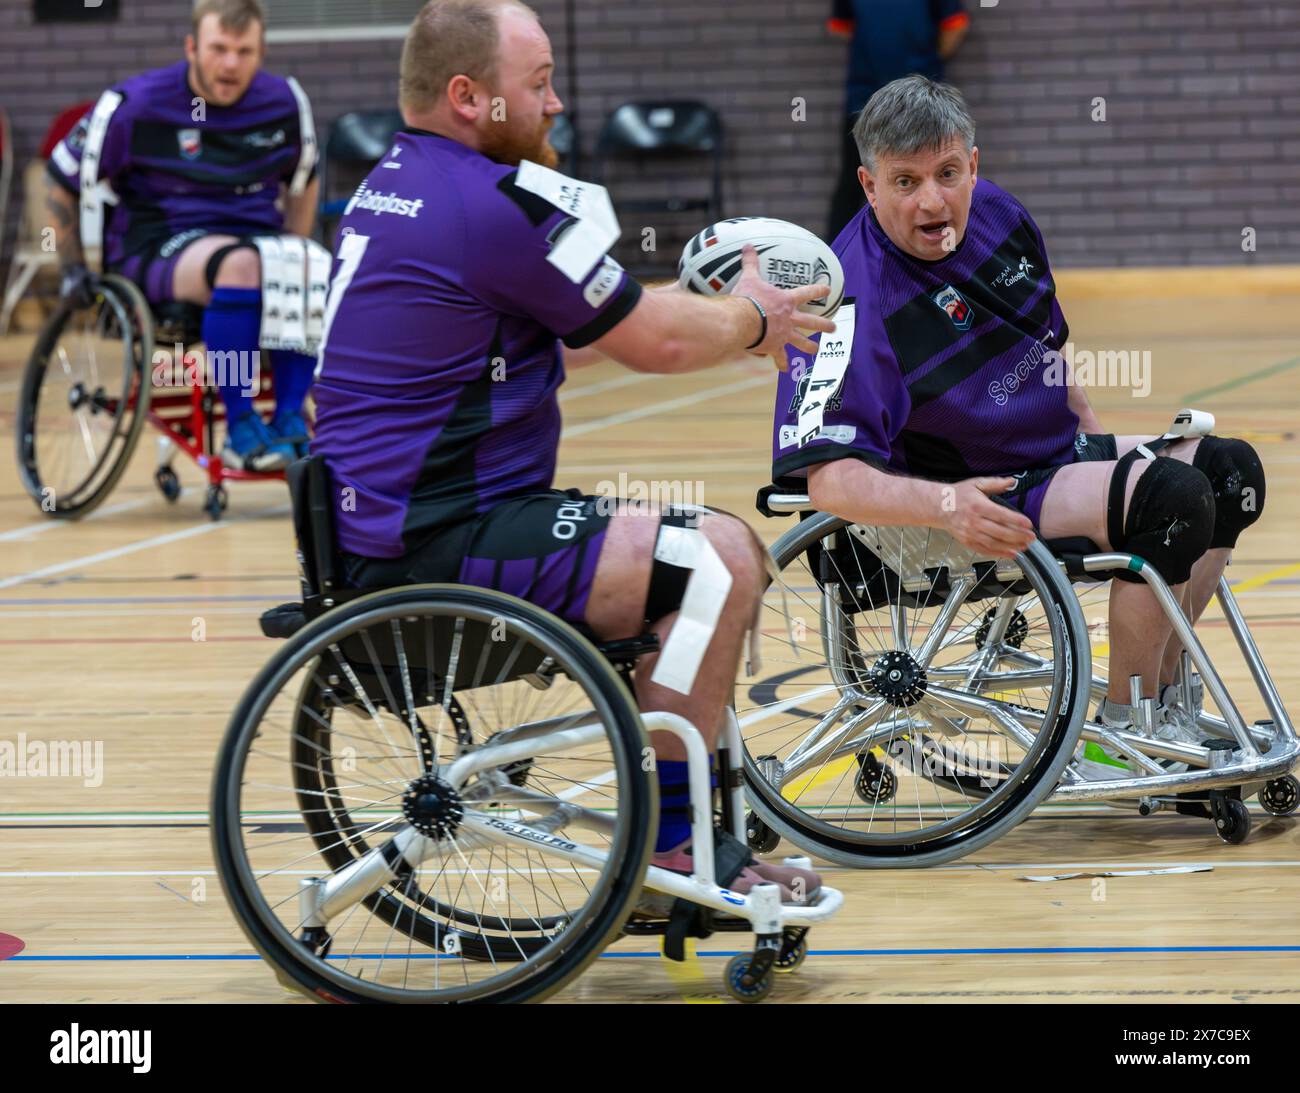 Brentwood Essex 19th May 2024 Wheelchair Rugby League: Brentwood Eels (Stripped shirt, yellow tags) vs Team Colostomy UK (Purple shirts, white tags) at the Brentwood Centre, Brentwood Essex UK Credit: Ian Davidson/Alamy Live News Stock Photo